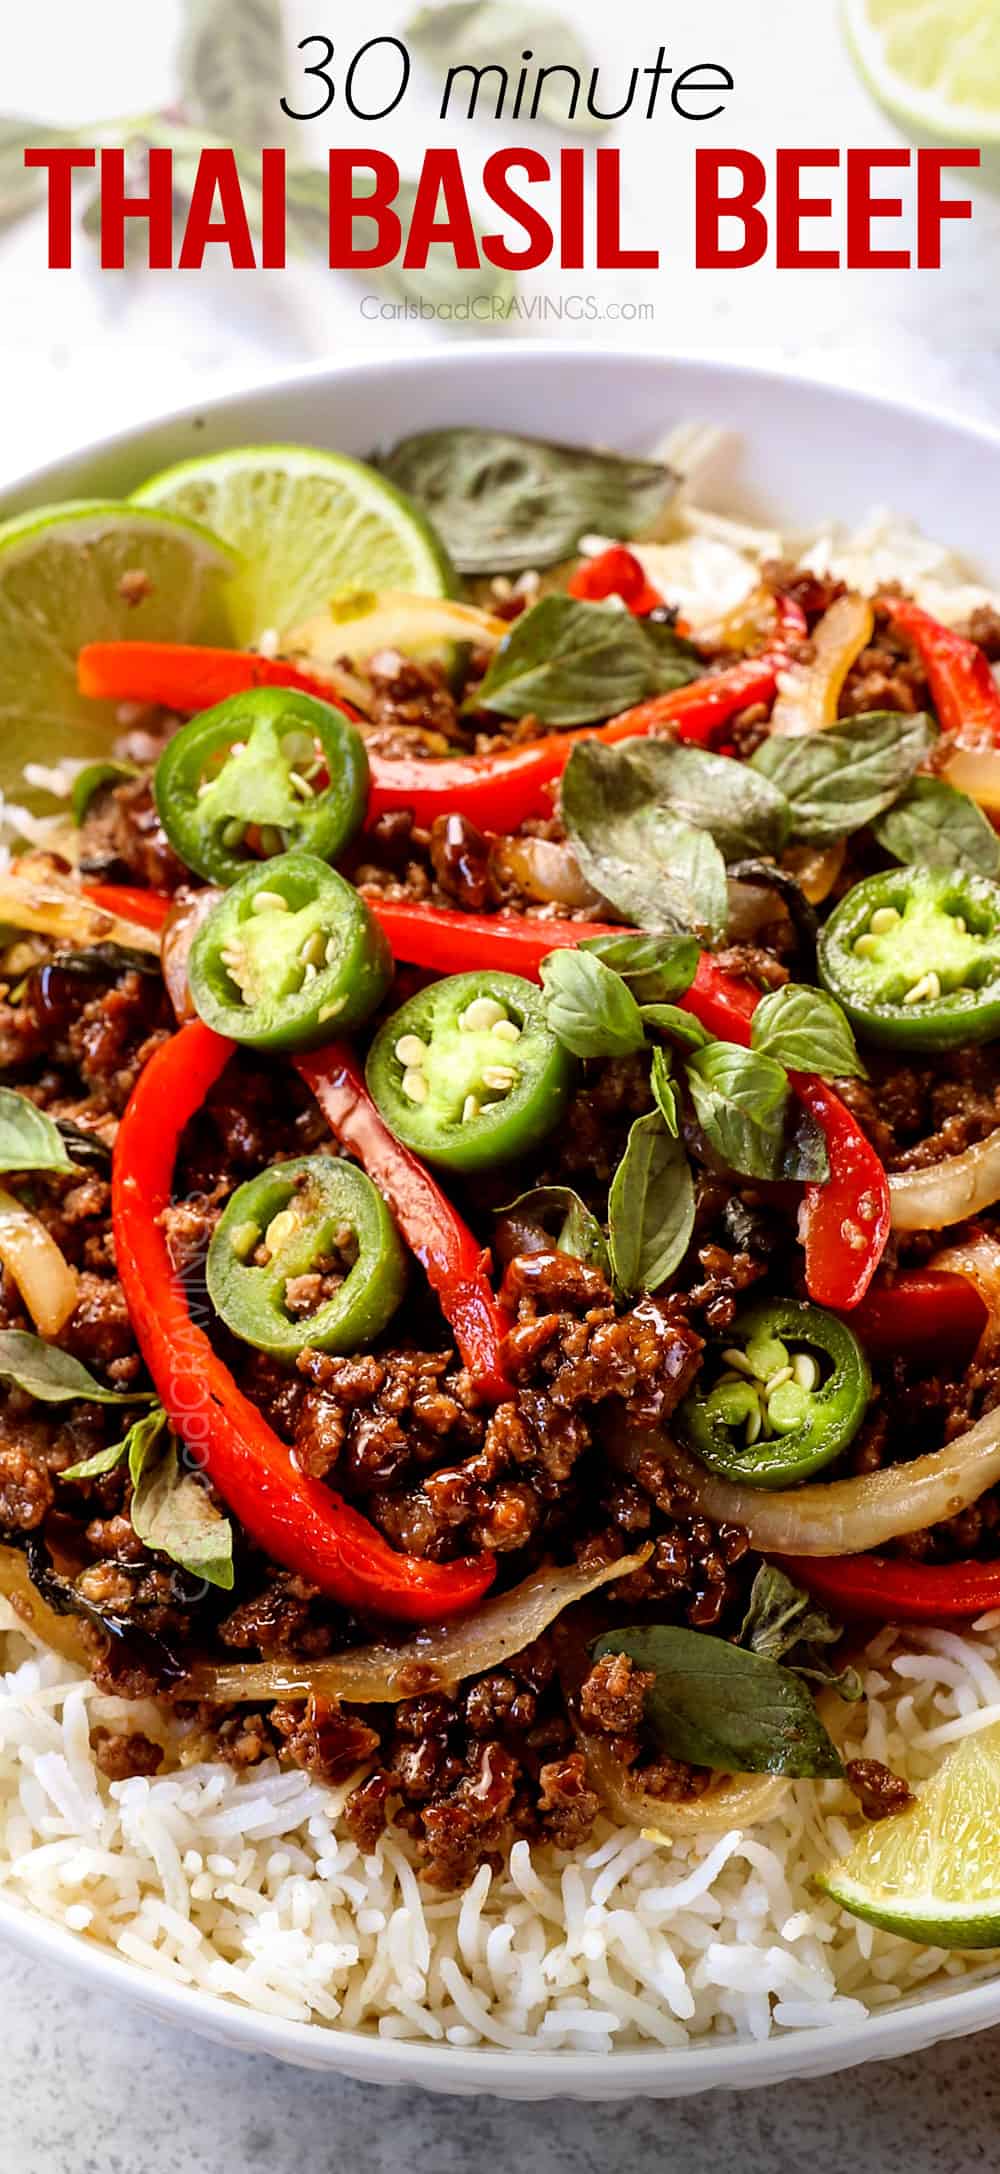 up close of Thai Basil Beef (Pad Gra Prow) with ground beef, Thai basil, chilies and red bell peppers served over rice